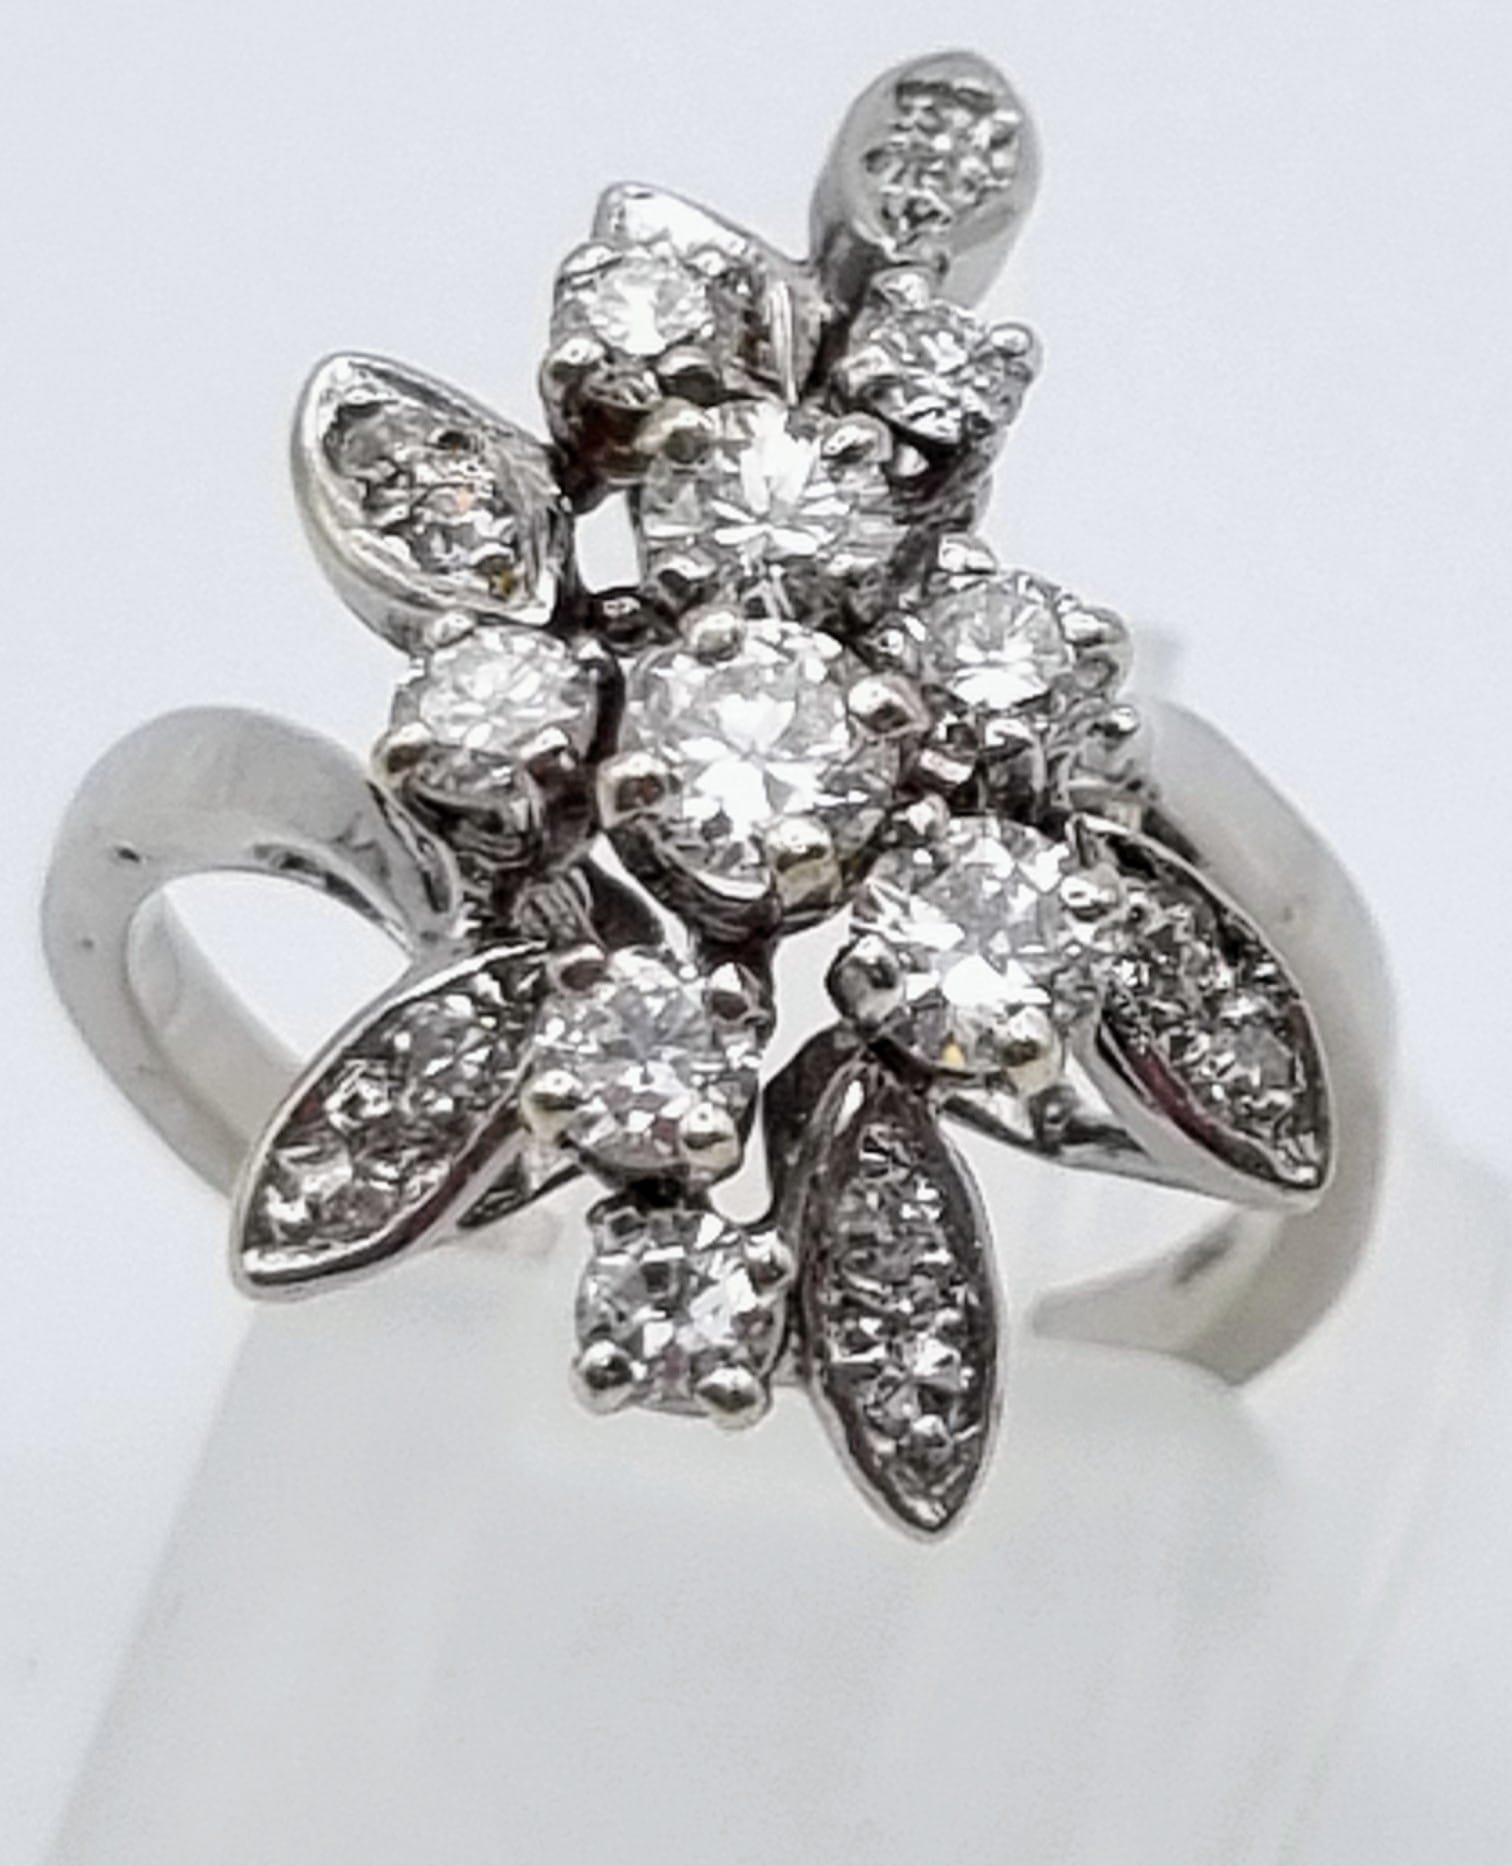 An 18K White Gold Diamond Floral Ring. Size K. 1ct 5.2g total weight.